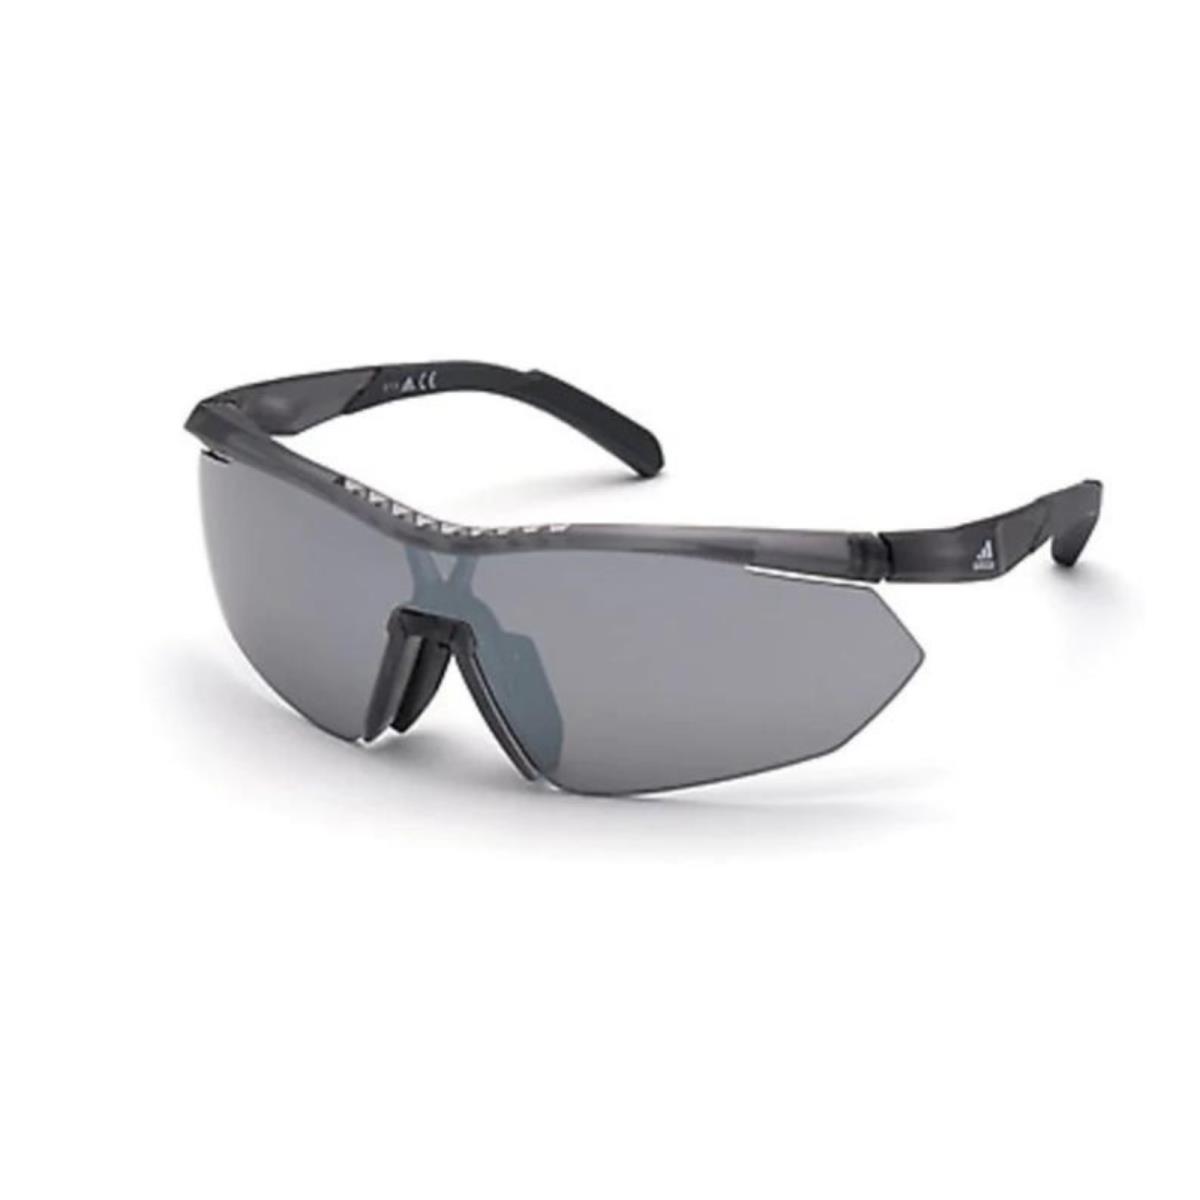 Adidas Sunglasses 0SP0016/S 20C Semi Rimless with Grey Color For Men